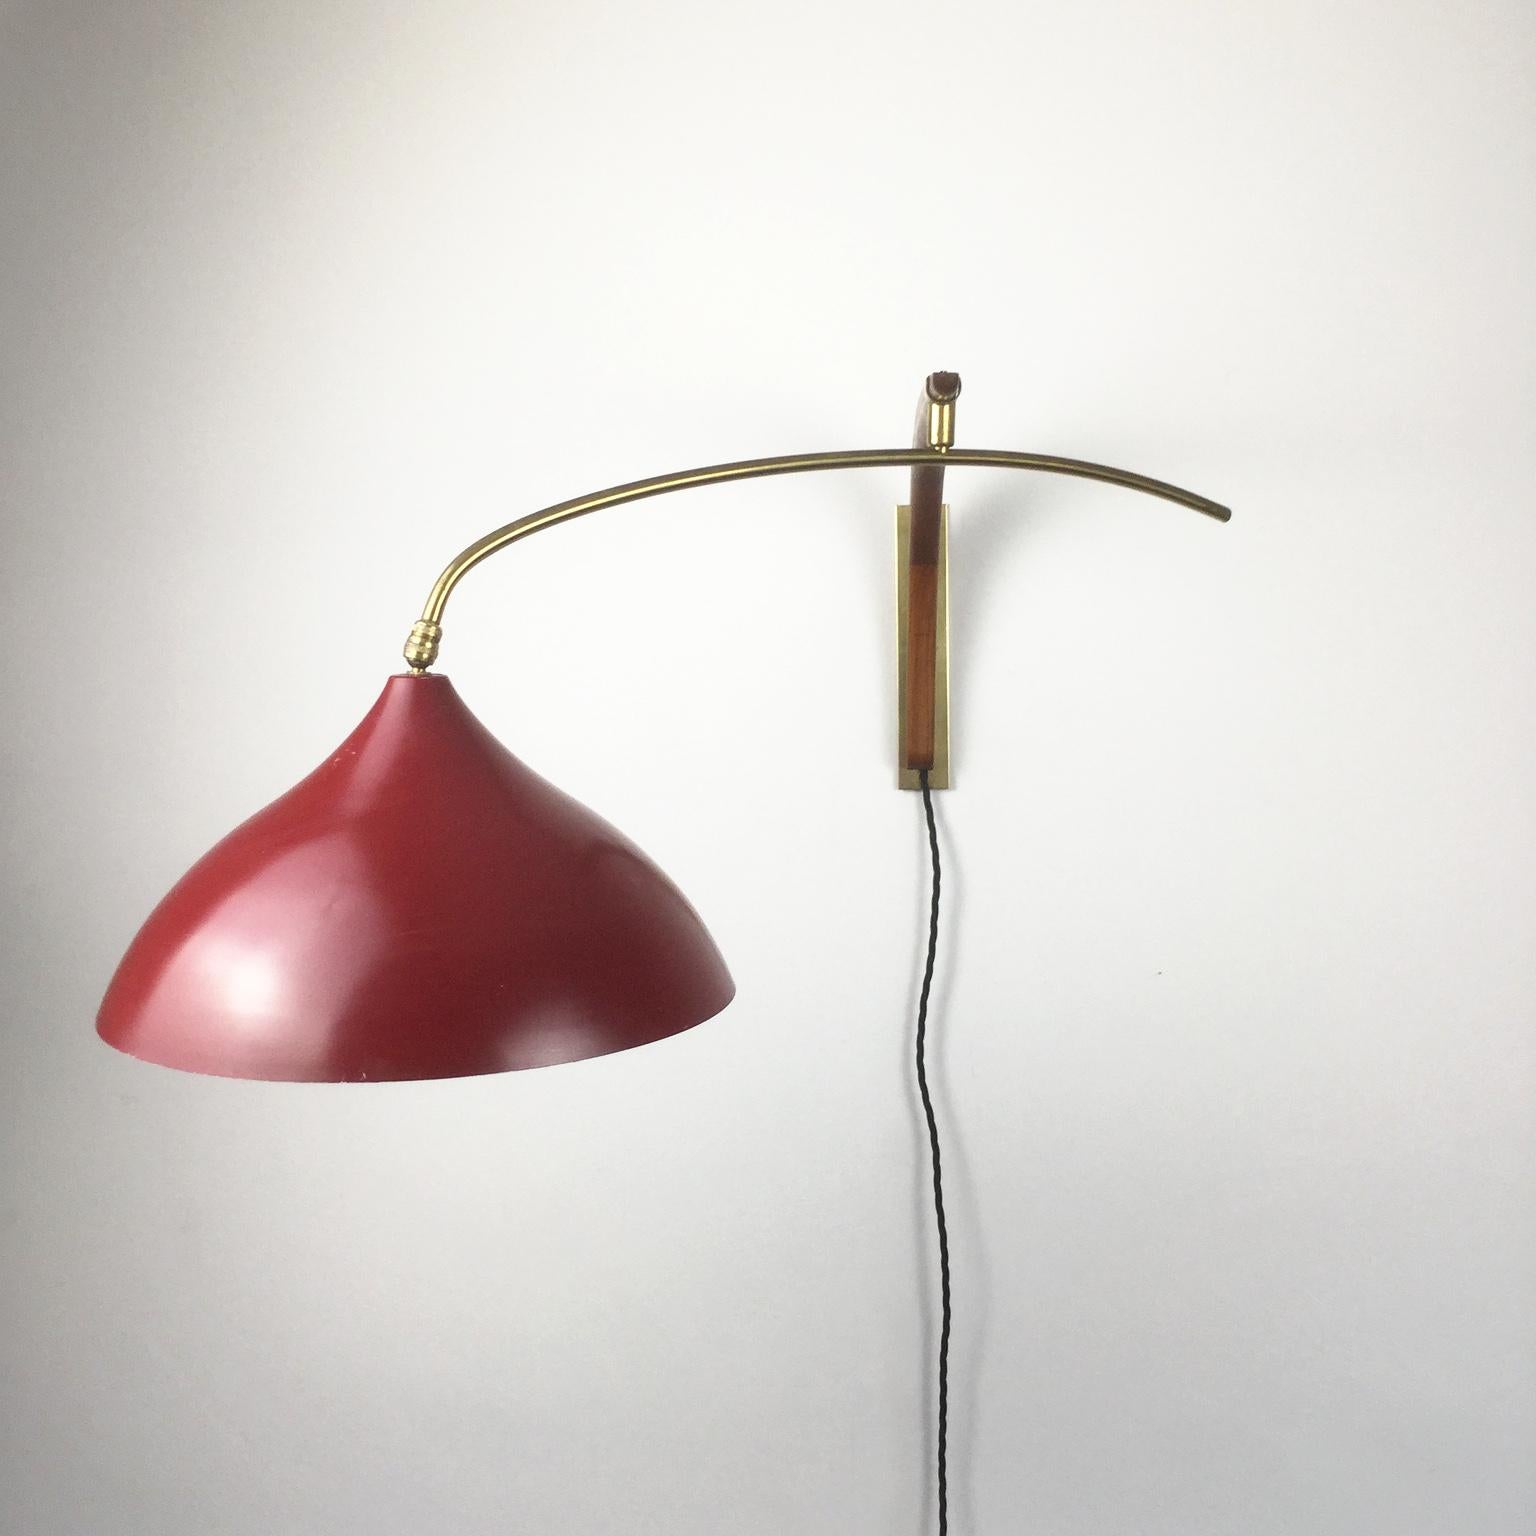 Mid-20th Century Orientable Danish Teak and Brass Wall Light by Svend Aage Holm Sorensen, 1950s